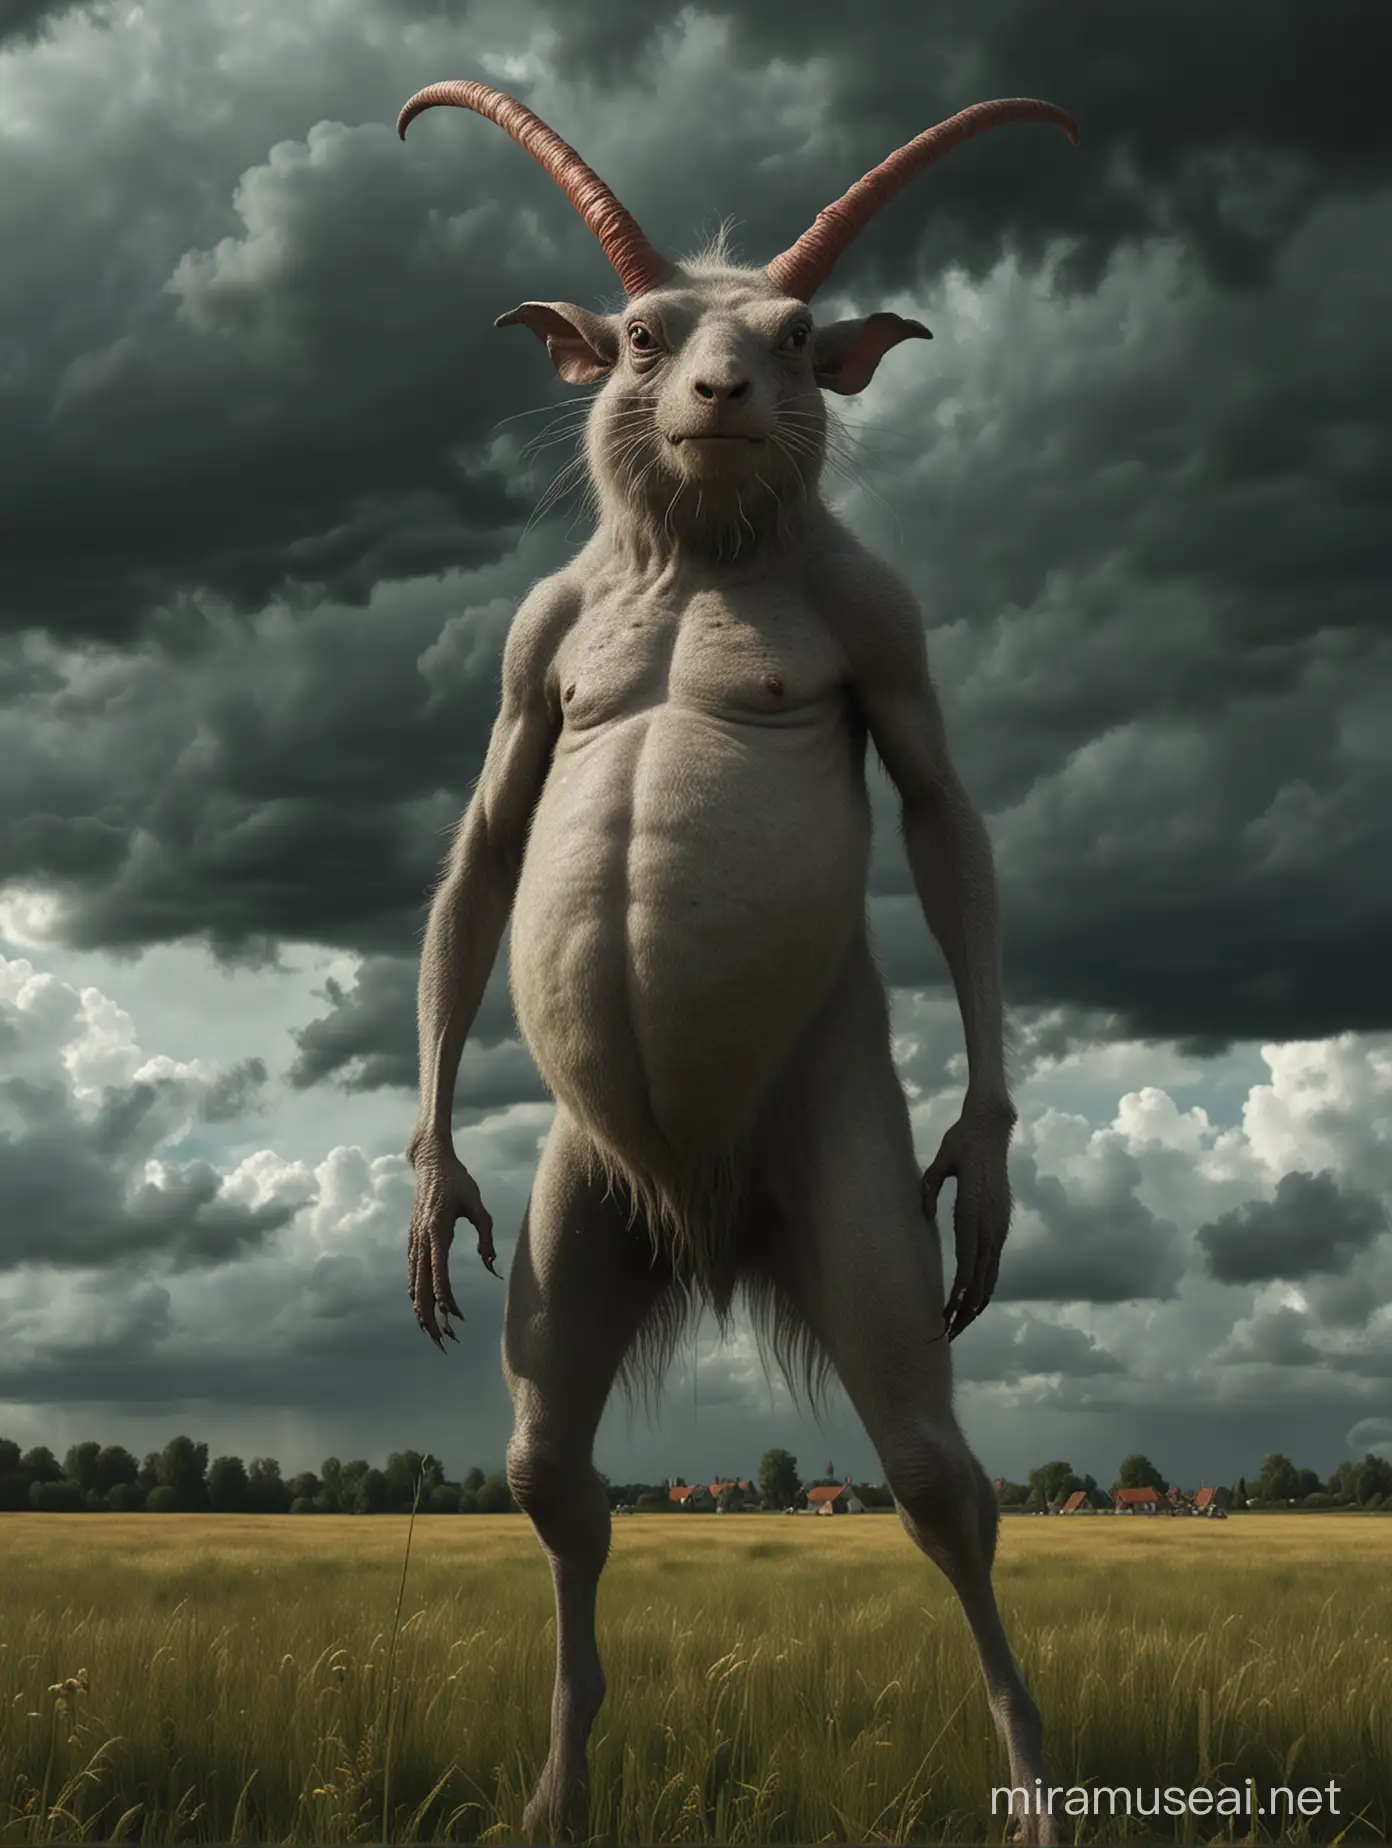 Photorealistic Hieronymus Bosch creature in a field, the sky is covered by dark clouds